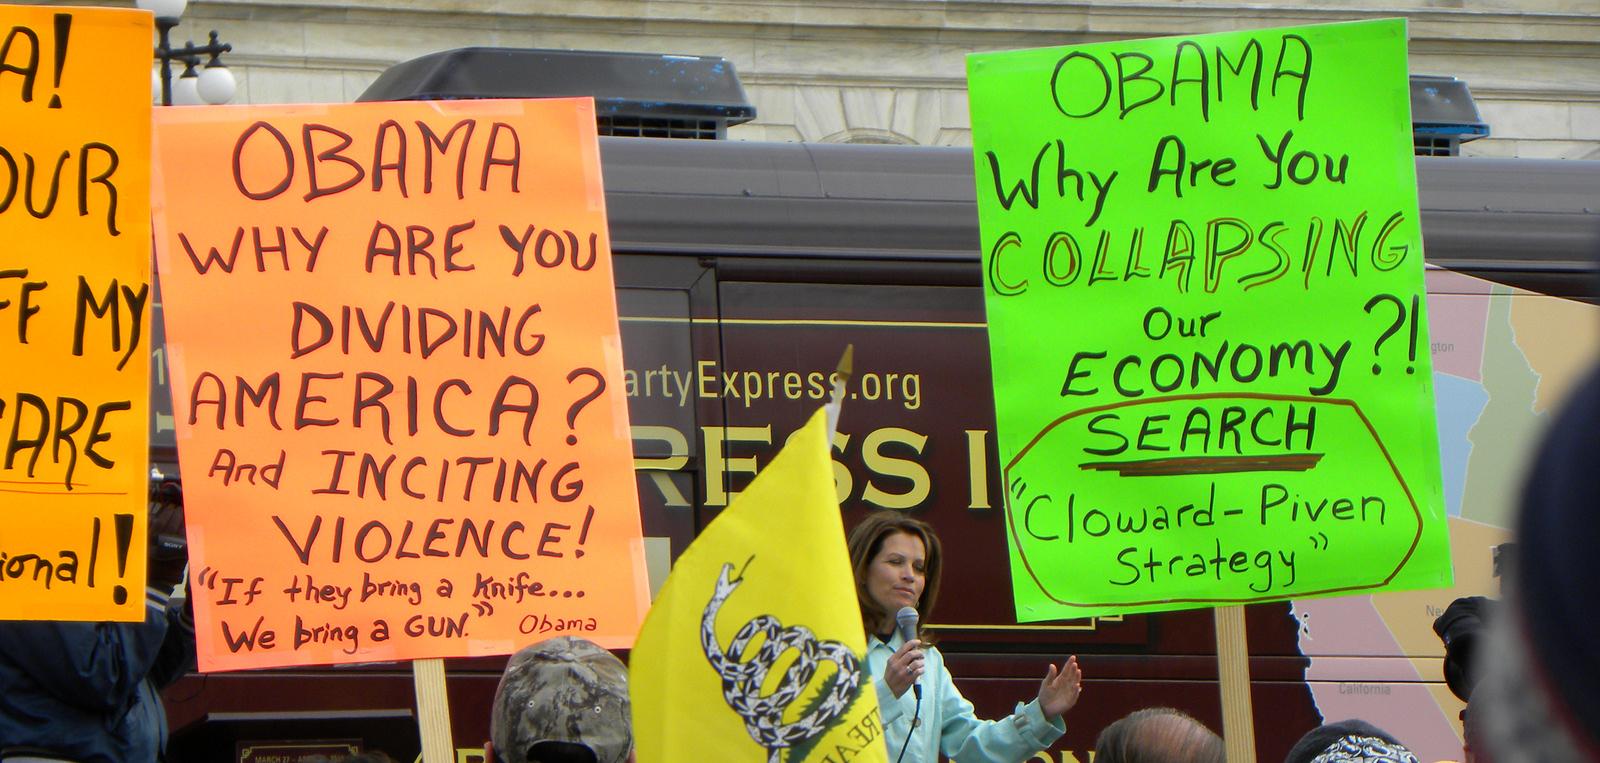 Protesters with signs that say "Obama why are you dividing America? And inciting violence!" and "Obama Why are you collapsing our economy?"